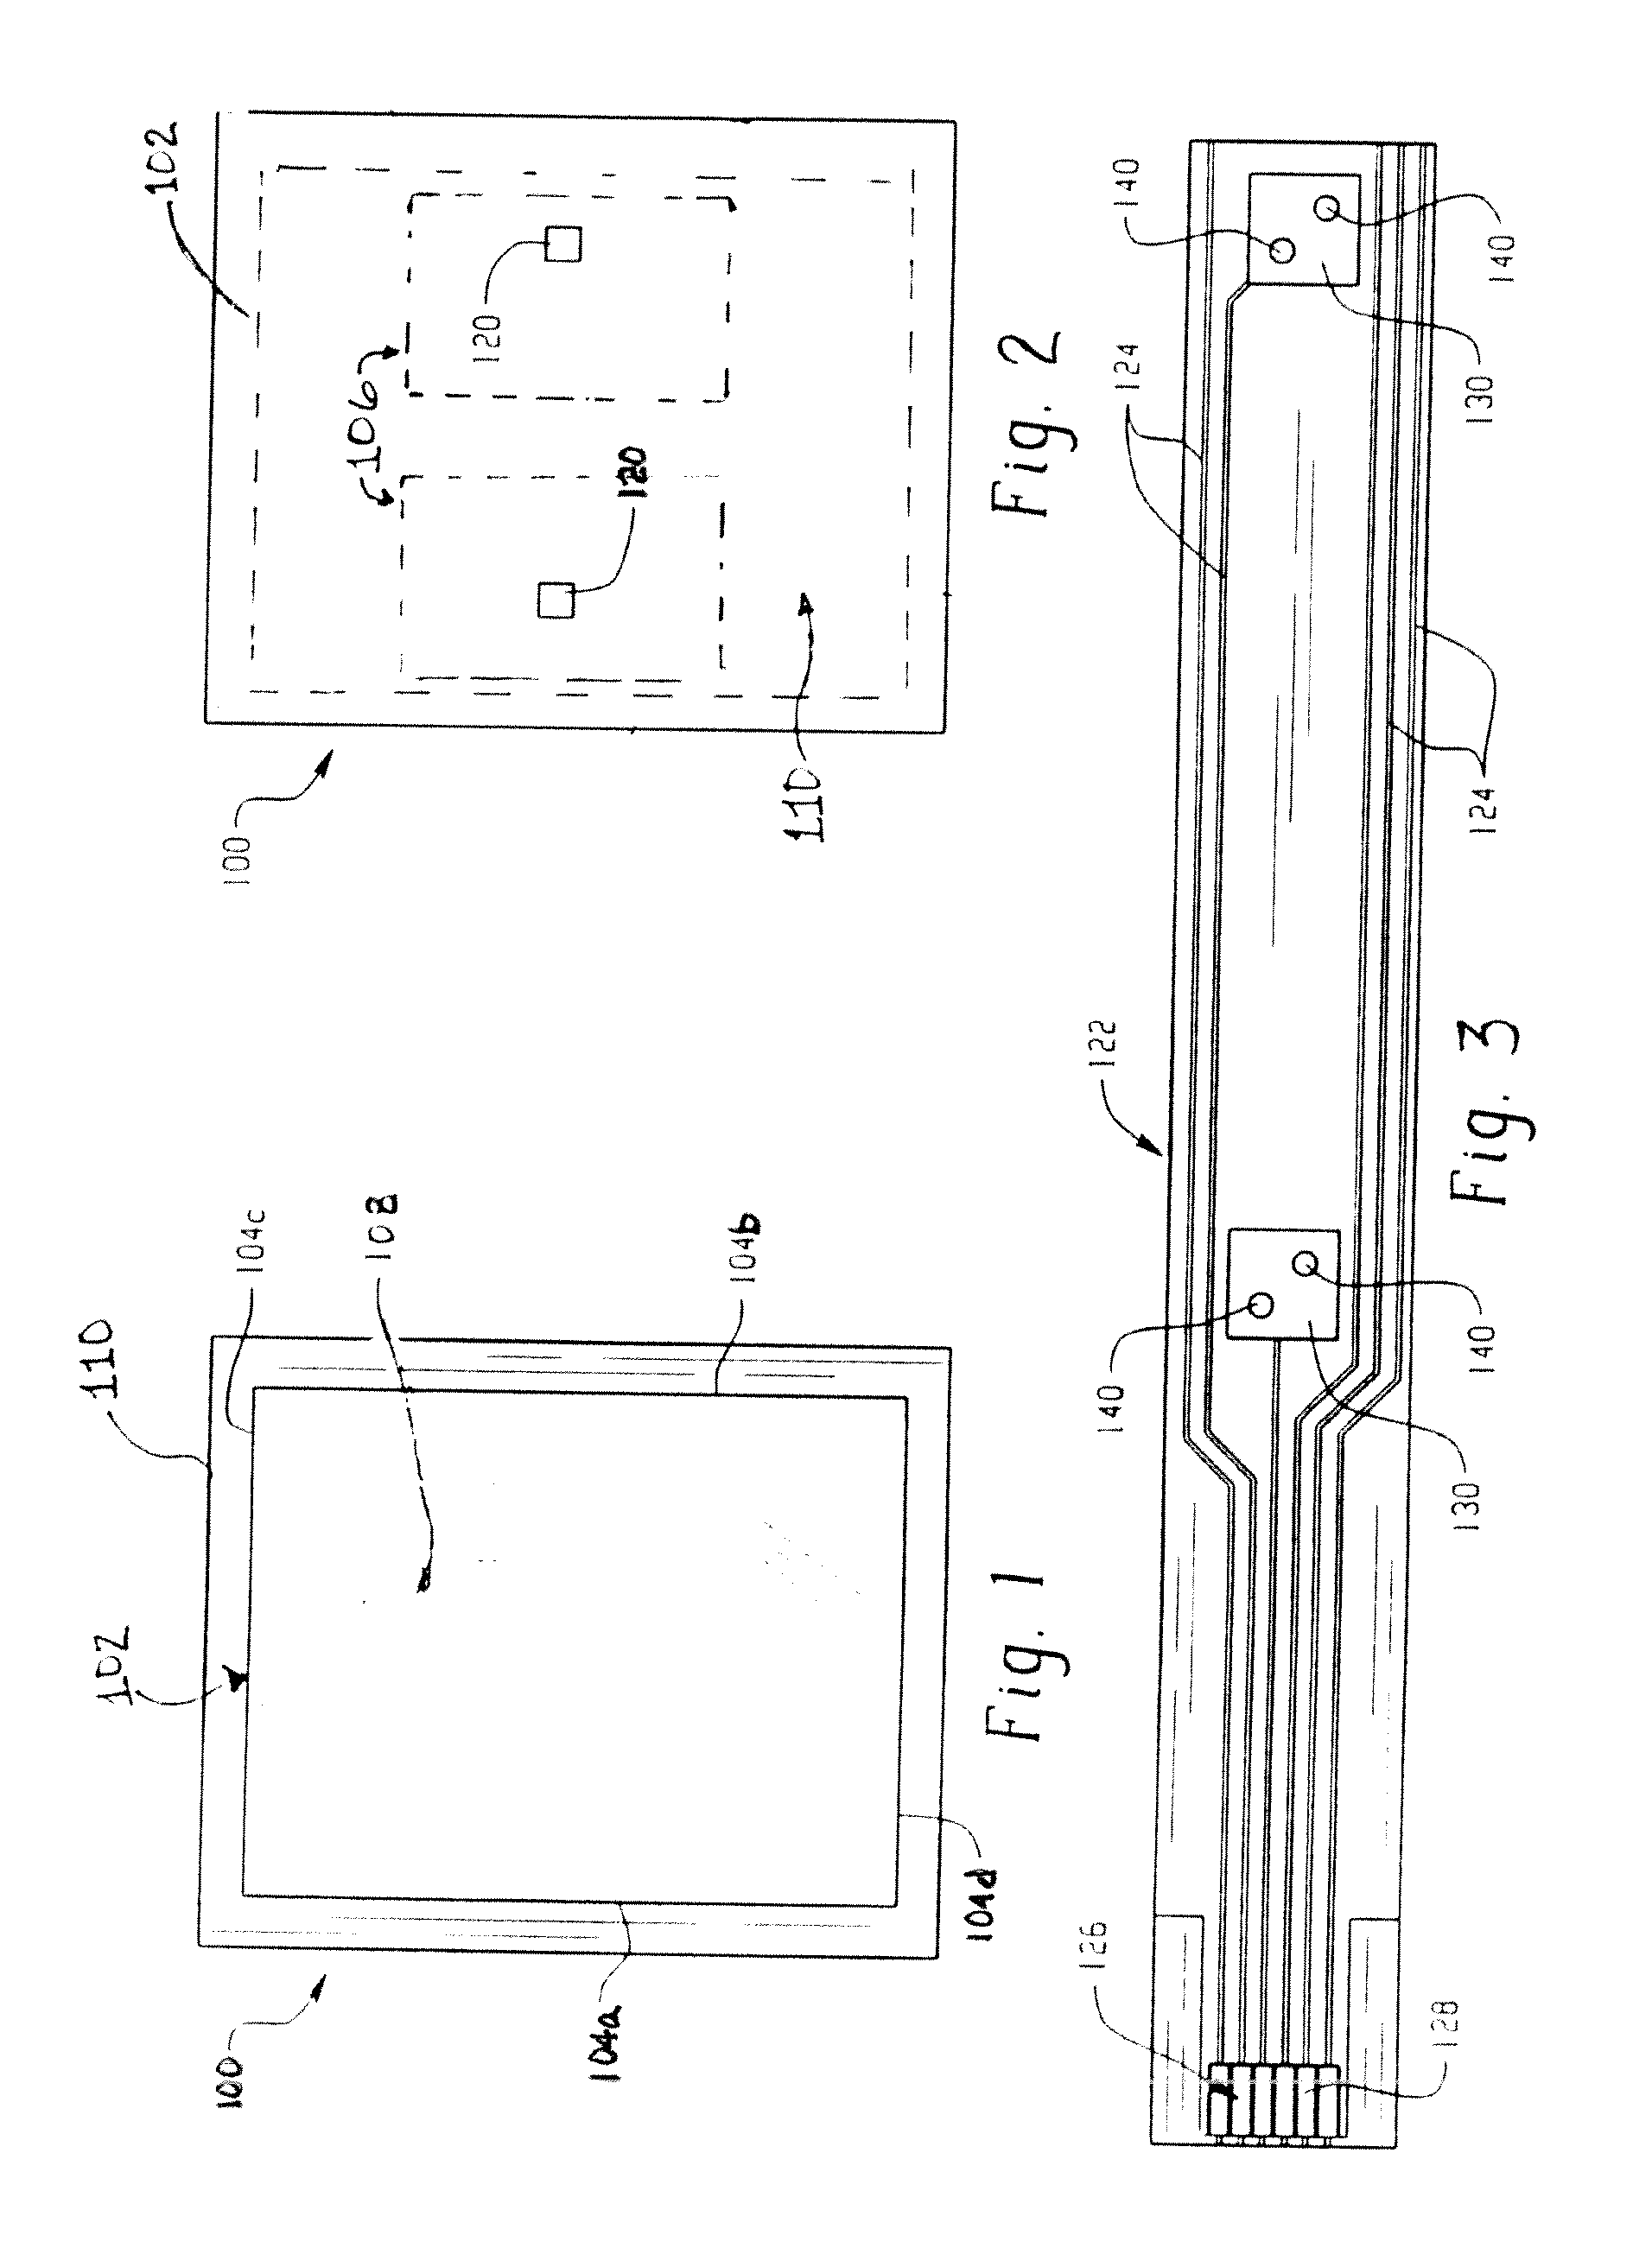 Low temperature contact structure for flexible solid state device